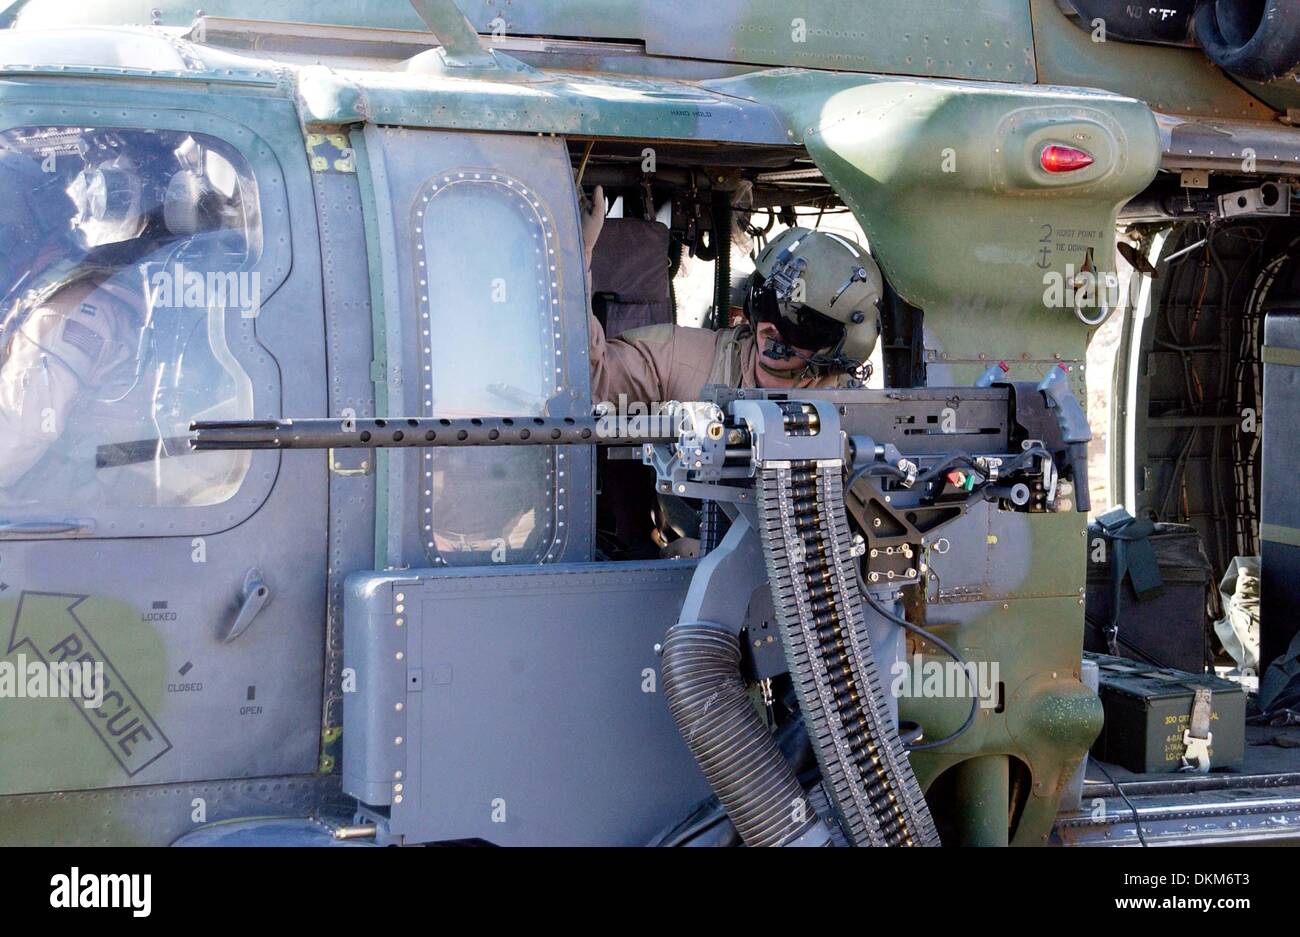 Nov. 23, 2002 - A member of the 66th Expeditionary Rescue Squadron is checking over the 50 caliber machine gun before a flight. The 66th had just completed a Time Compliance weapon modifications on an HH-60 Pavehawk helicopter. Forward deployed, the 410 Air Expeditionary Wing, is responsible for combat search and rescue sorties flown in support of Operation Iraqi Freedom. Operation Stock Photo